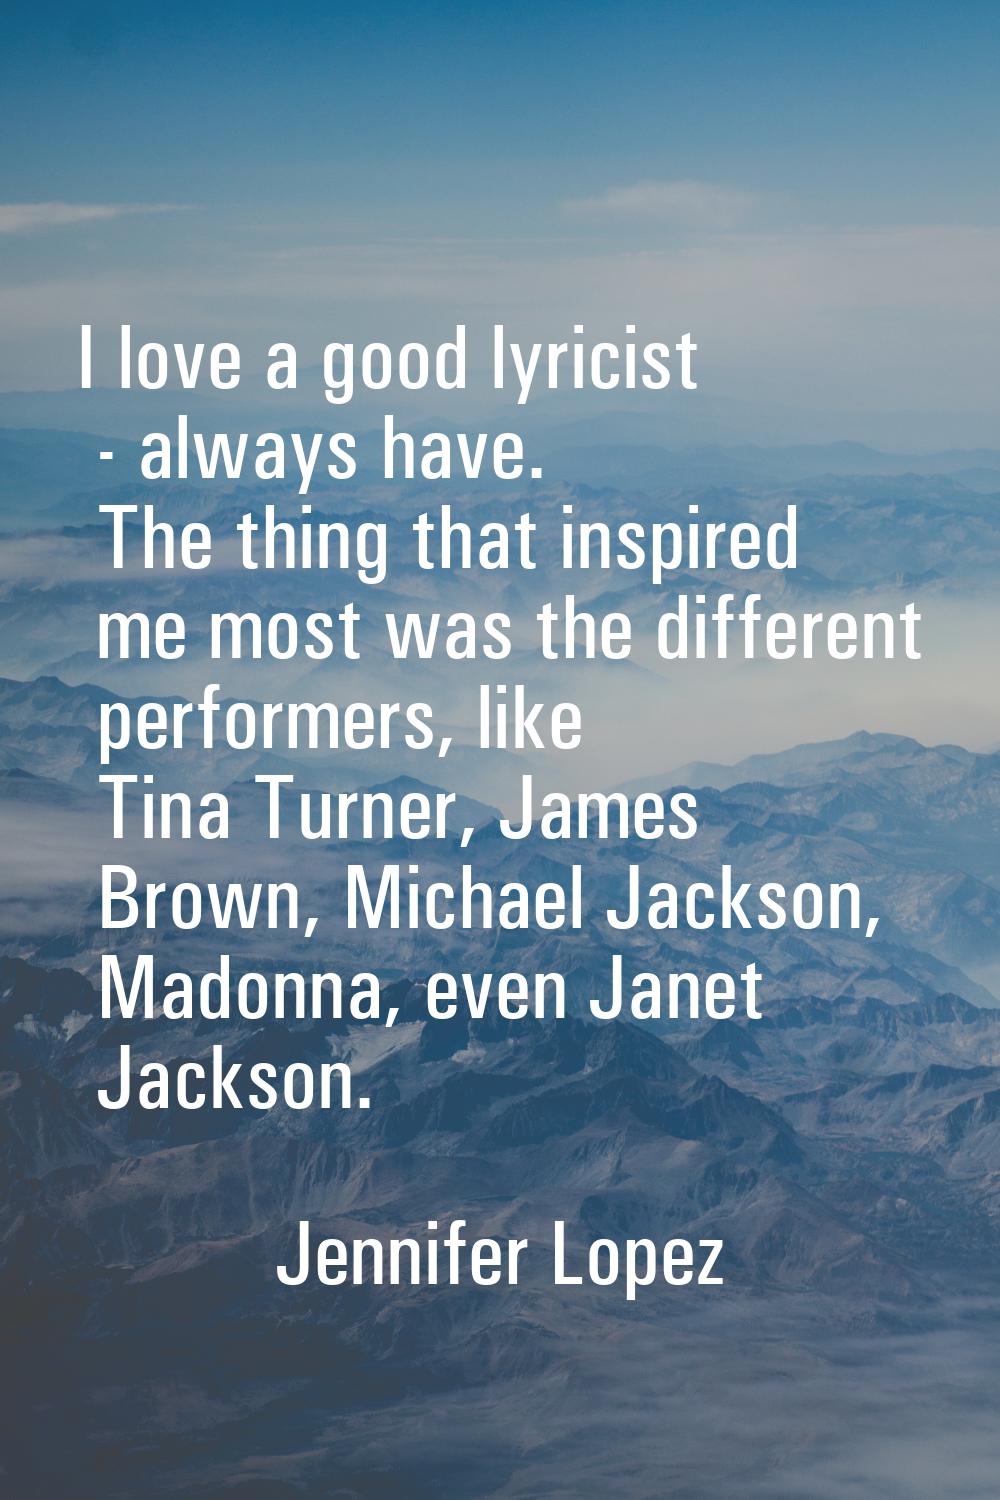 I love a good lyricist - always have. The thing that inspired me most was the different performers,